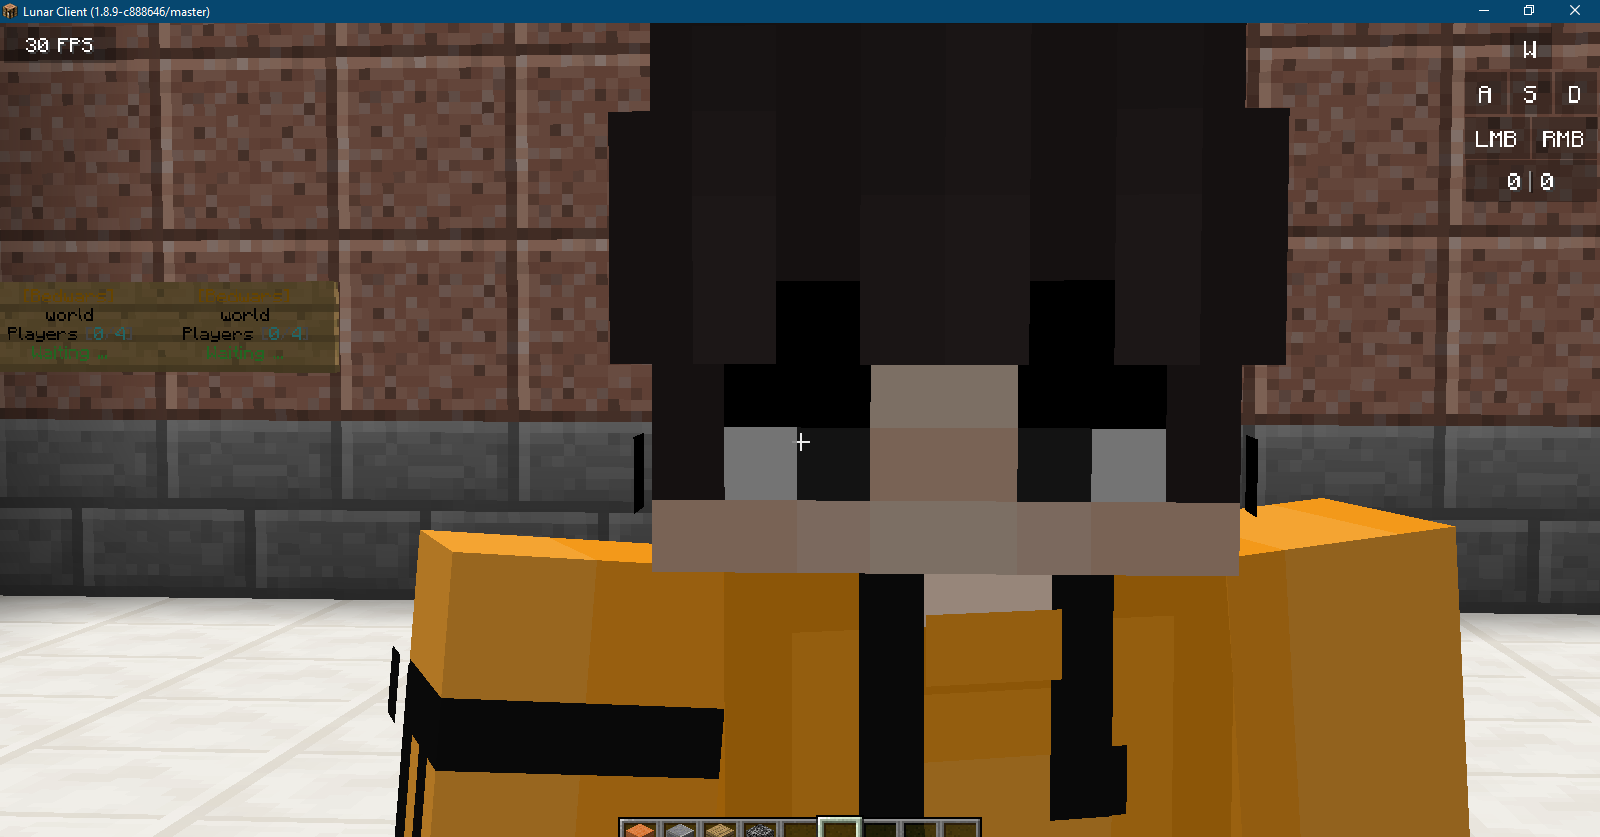 Drei1010_YT's Profile Picture on PvPRP